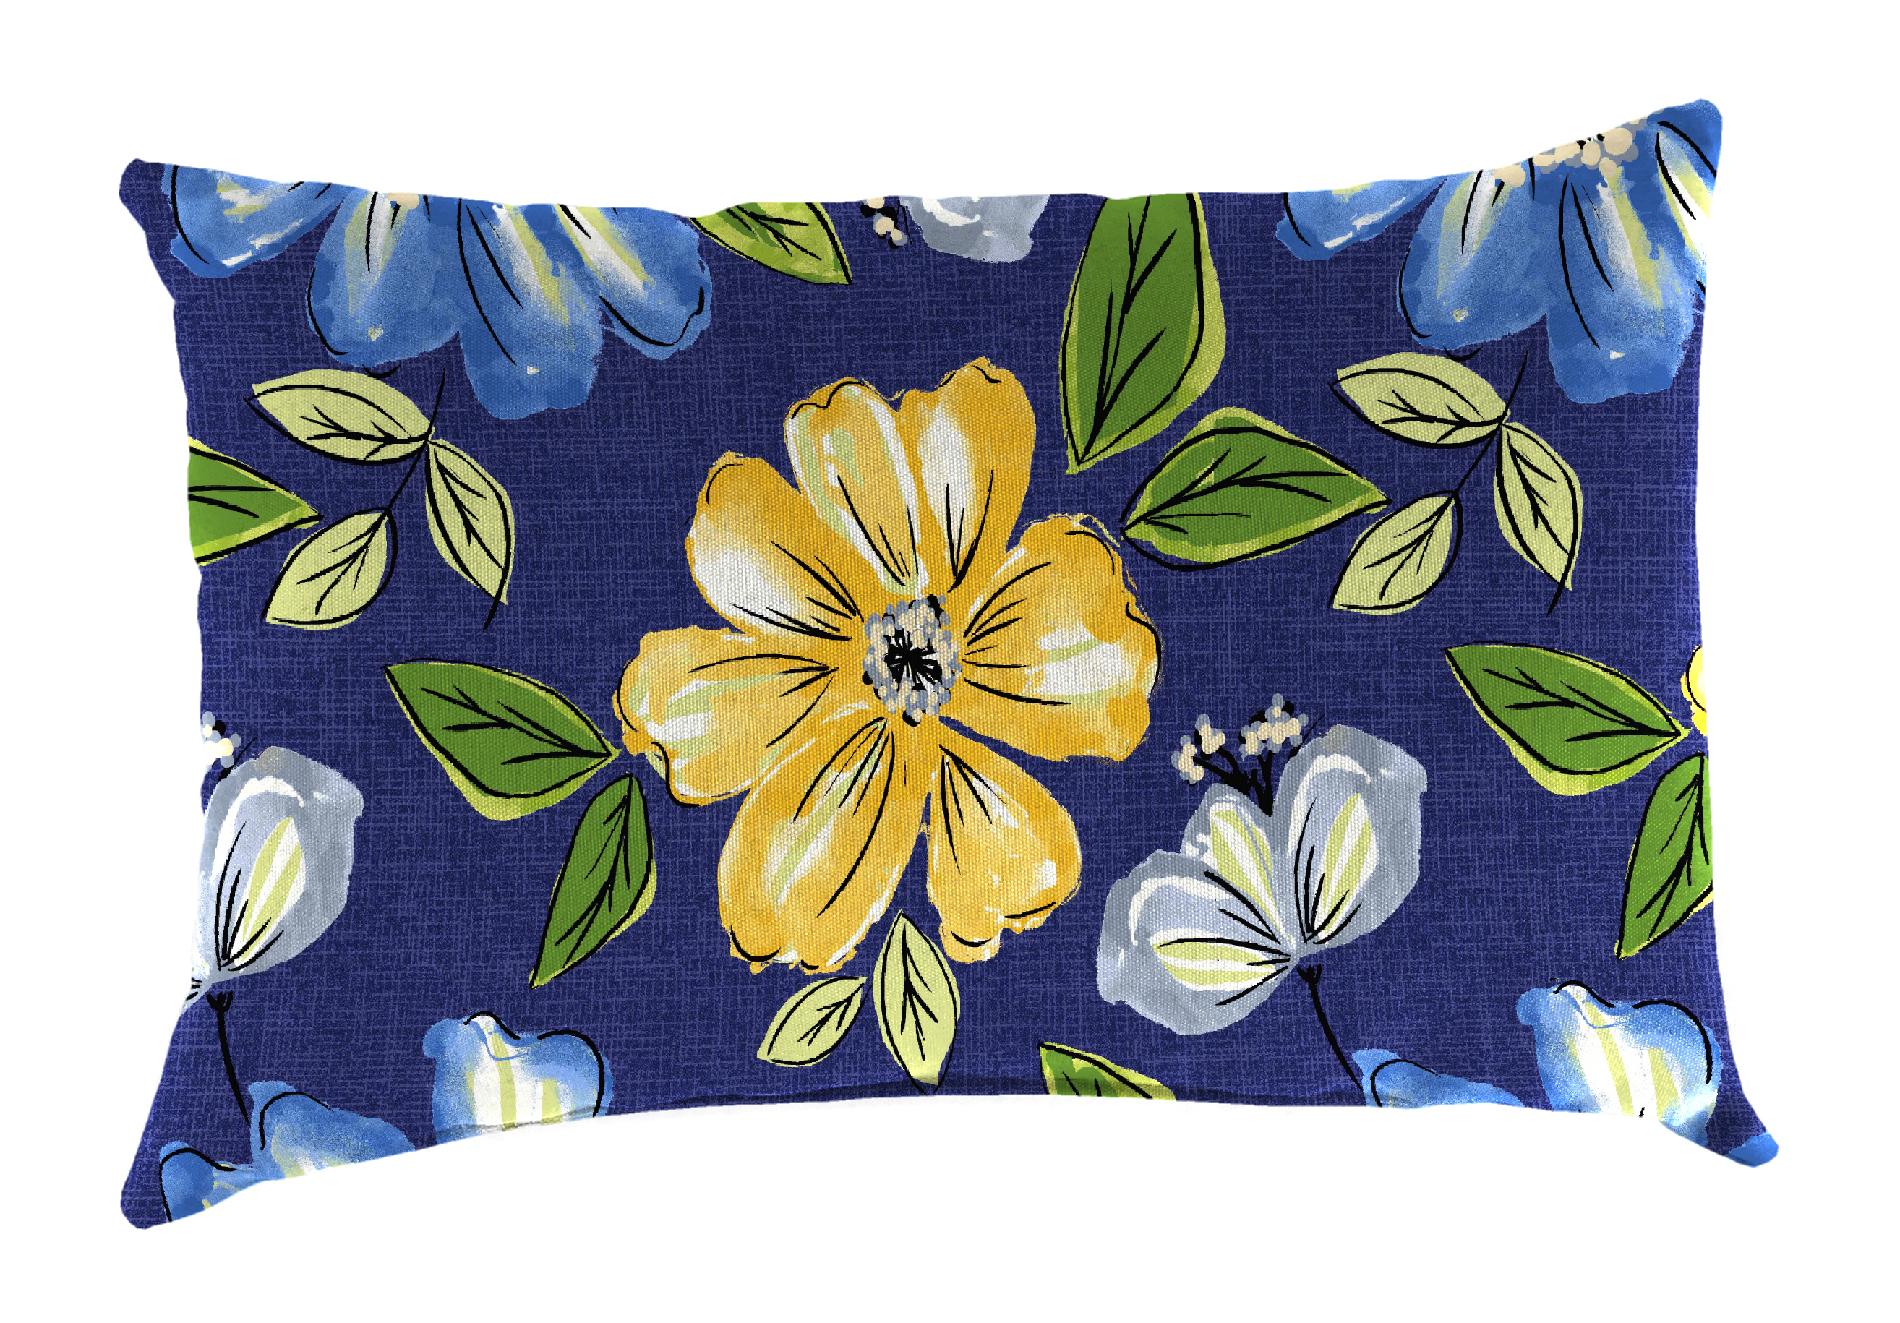 18" x 12" Toss Pillow  in Janice Royal